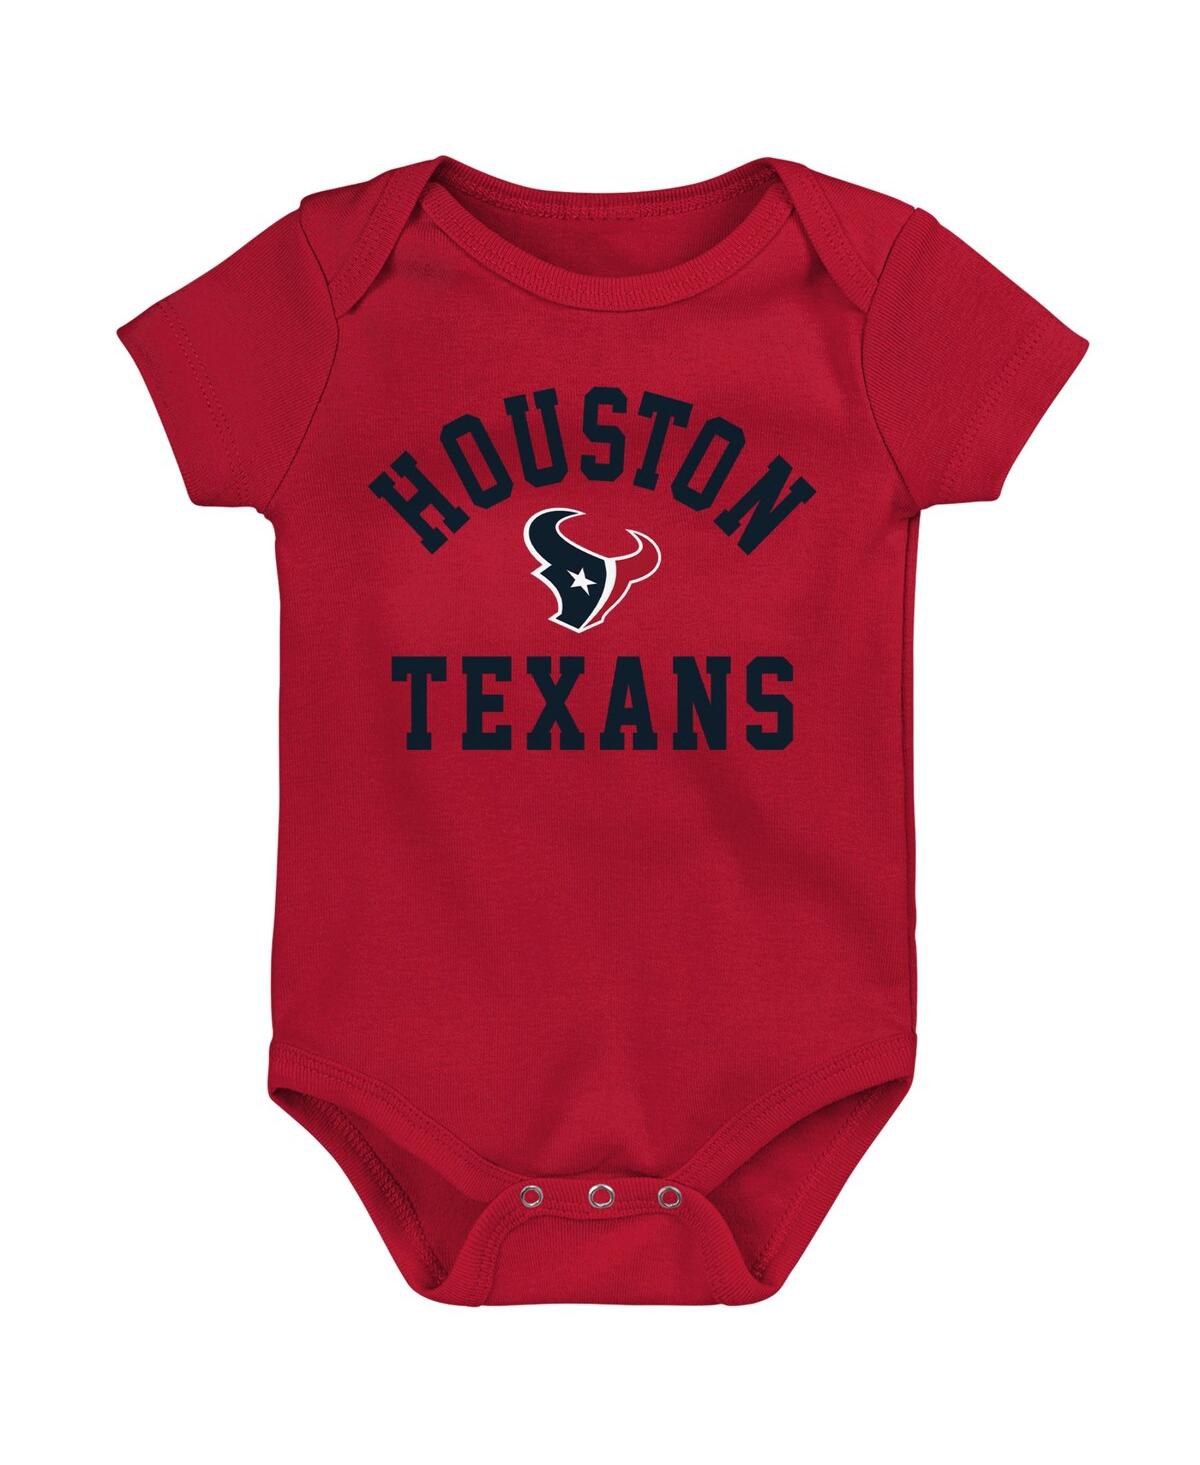 Shop Outerstuff Baby Boys And Girls Navy, Red, Heather Gray Houston Texans Three-pack Eat, Sleep And Drool Retro Bod In Navy,red,heather Gray